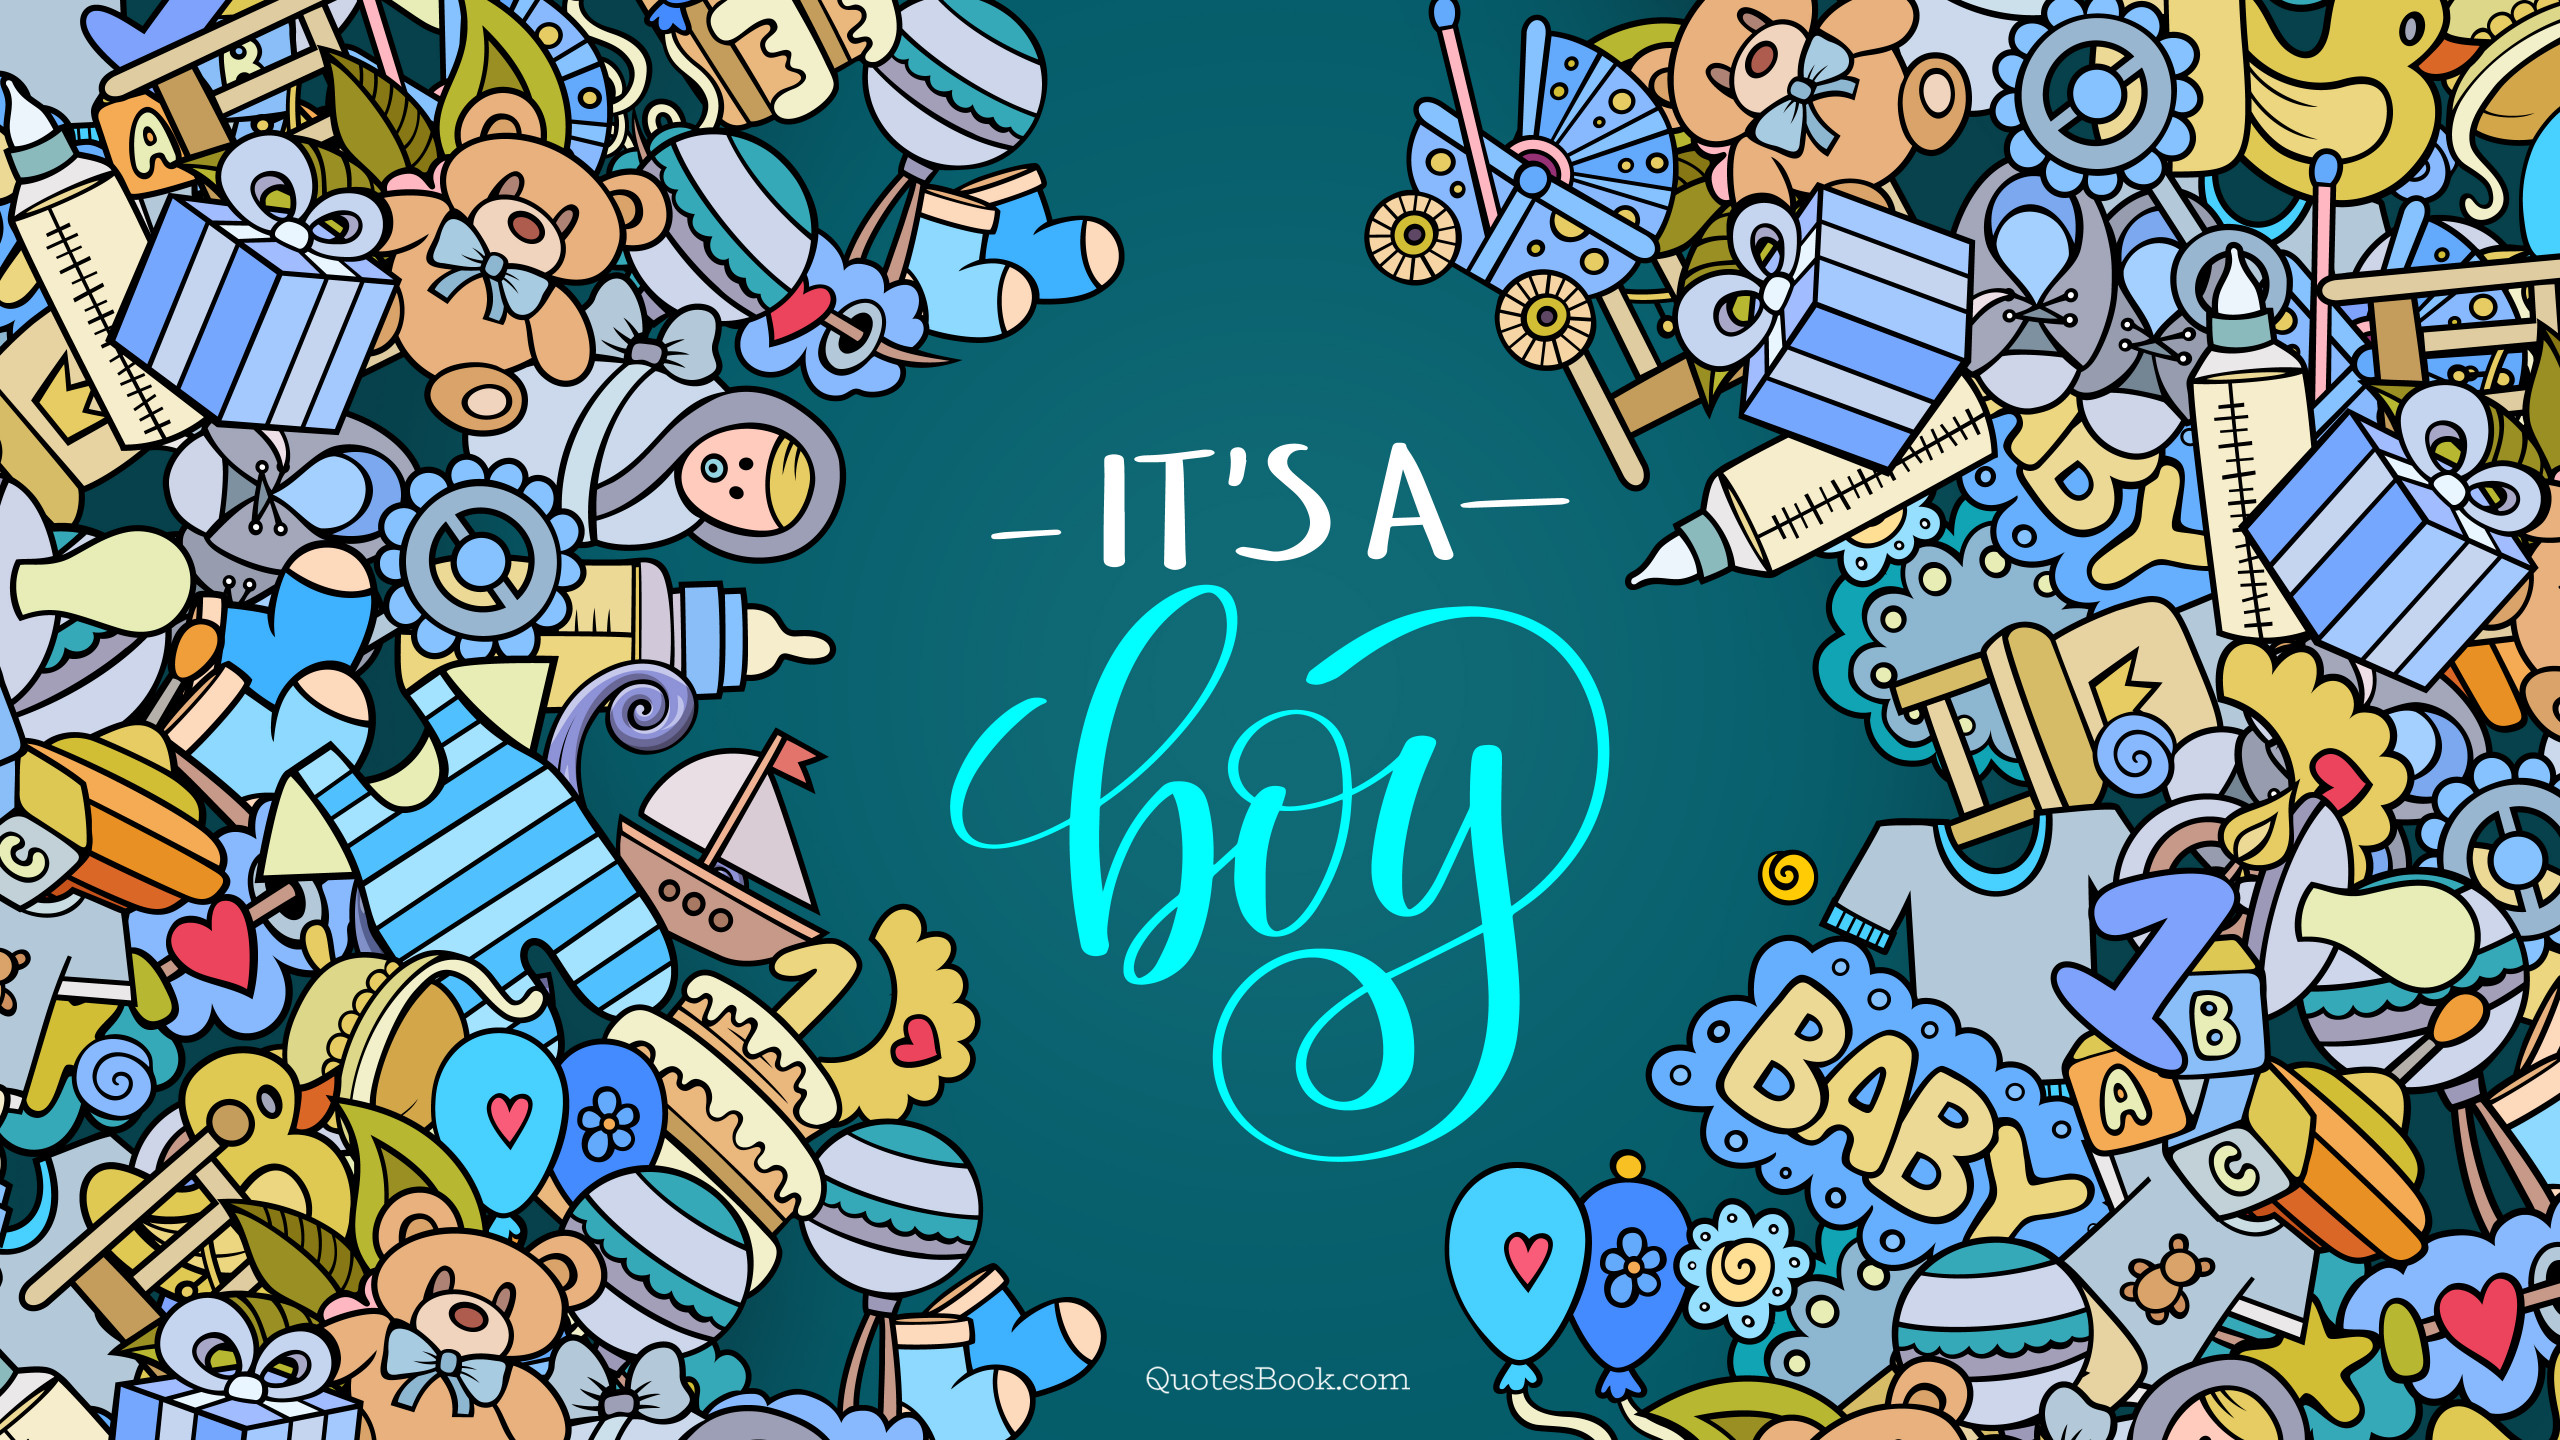 13,173 Its A Boy Images, Stock Photos, 3D objects, & Vectors | Shutterstock